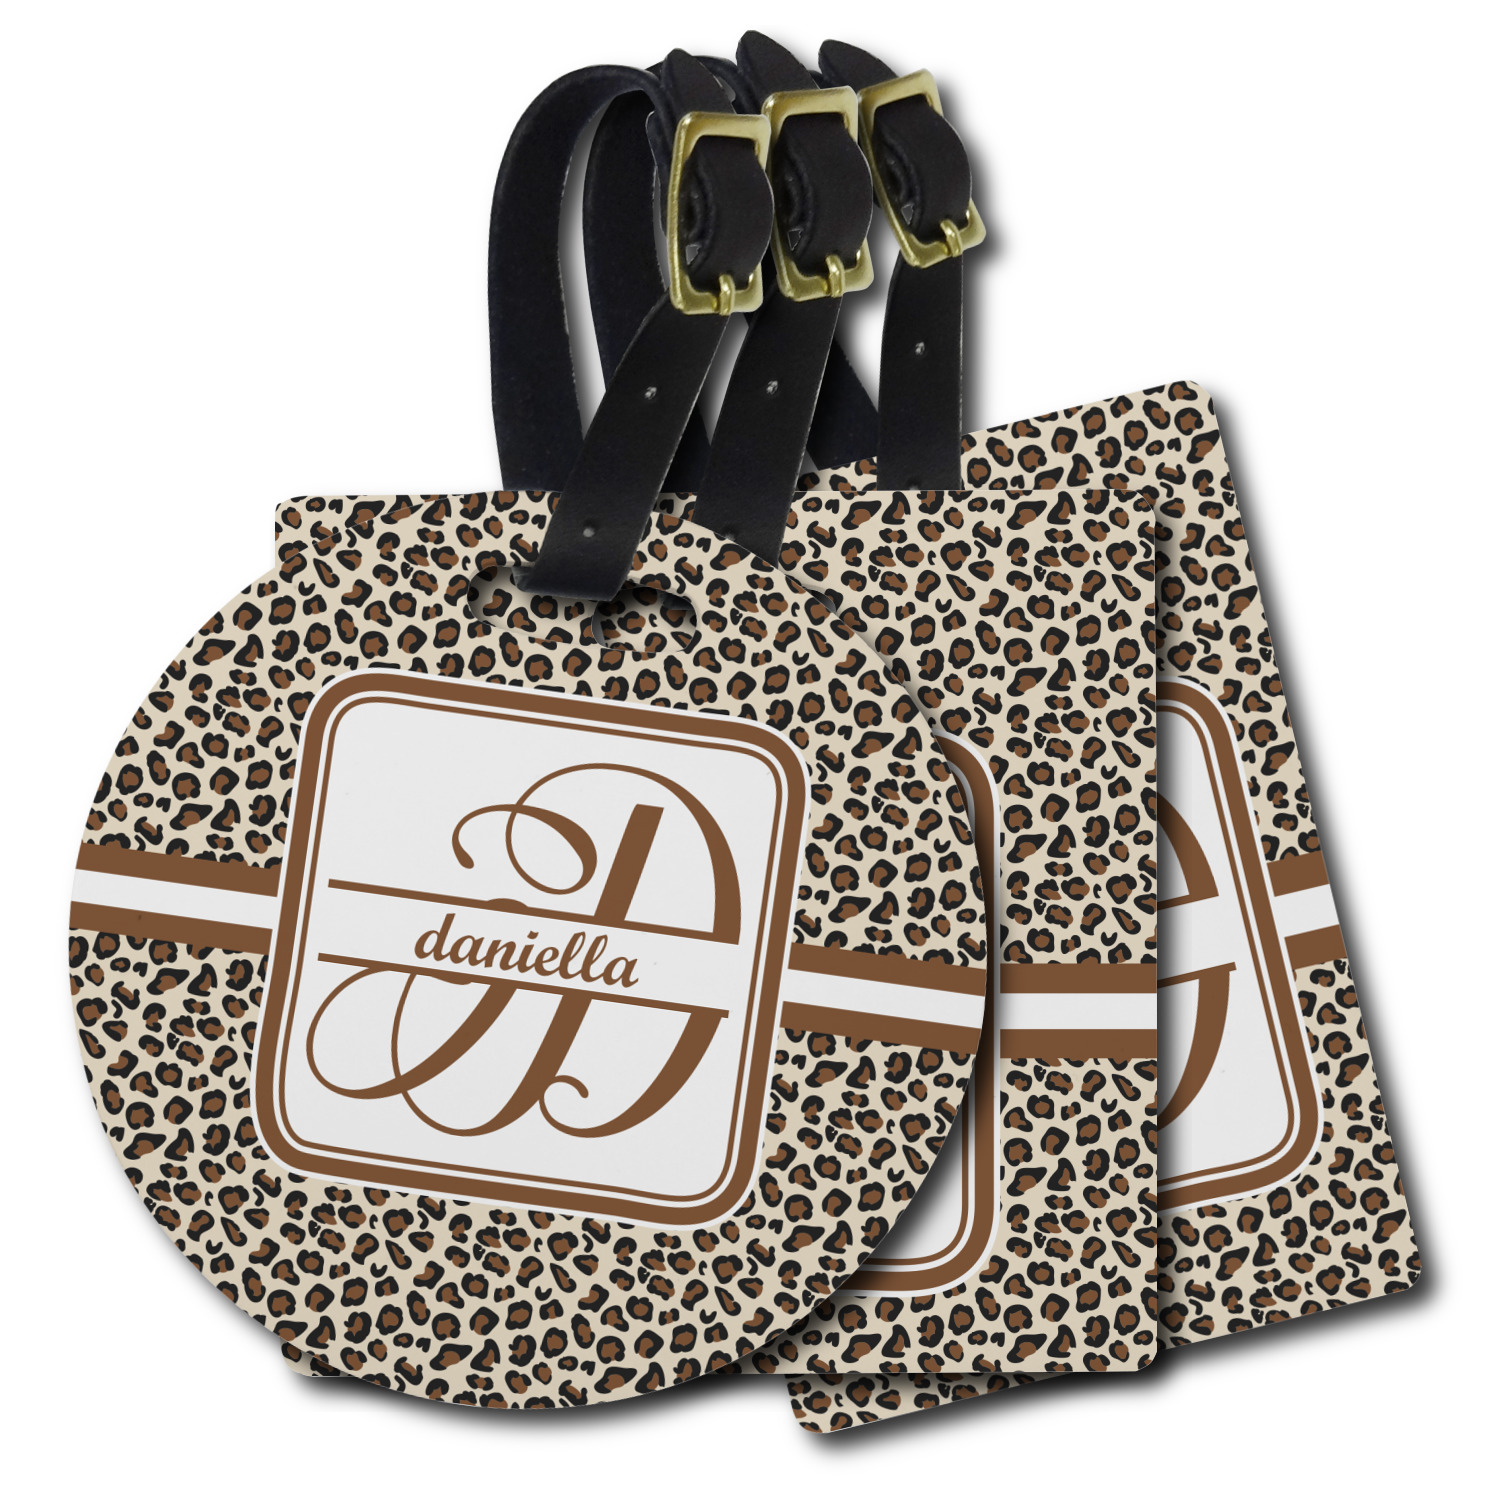 leopard-print-plastic-luggage-tags-personalized-youcustomizeit